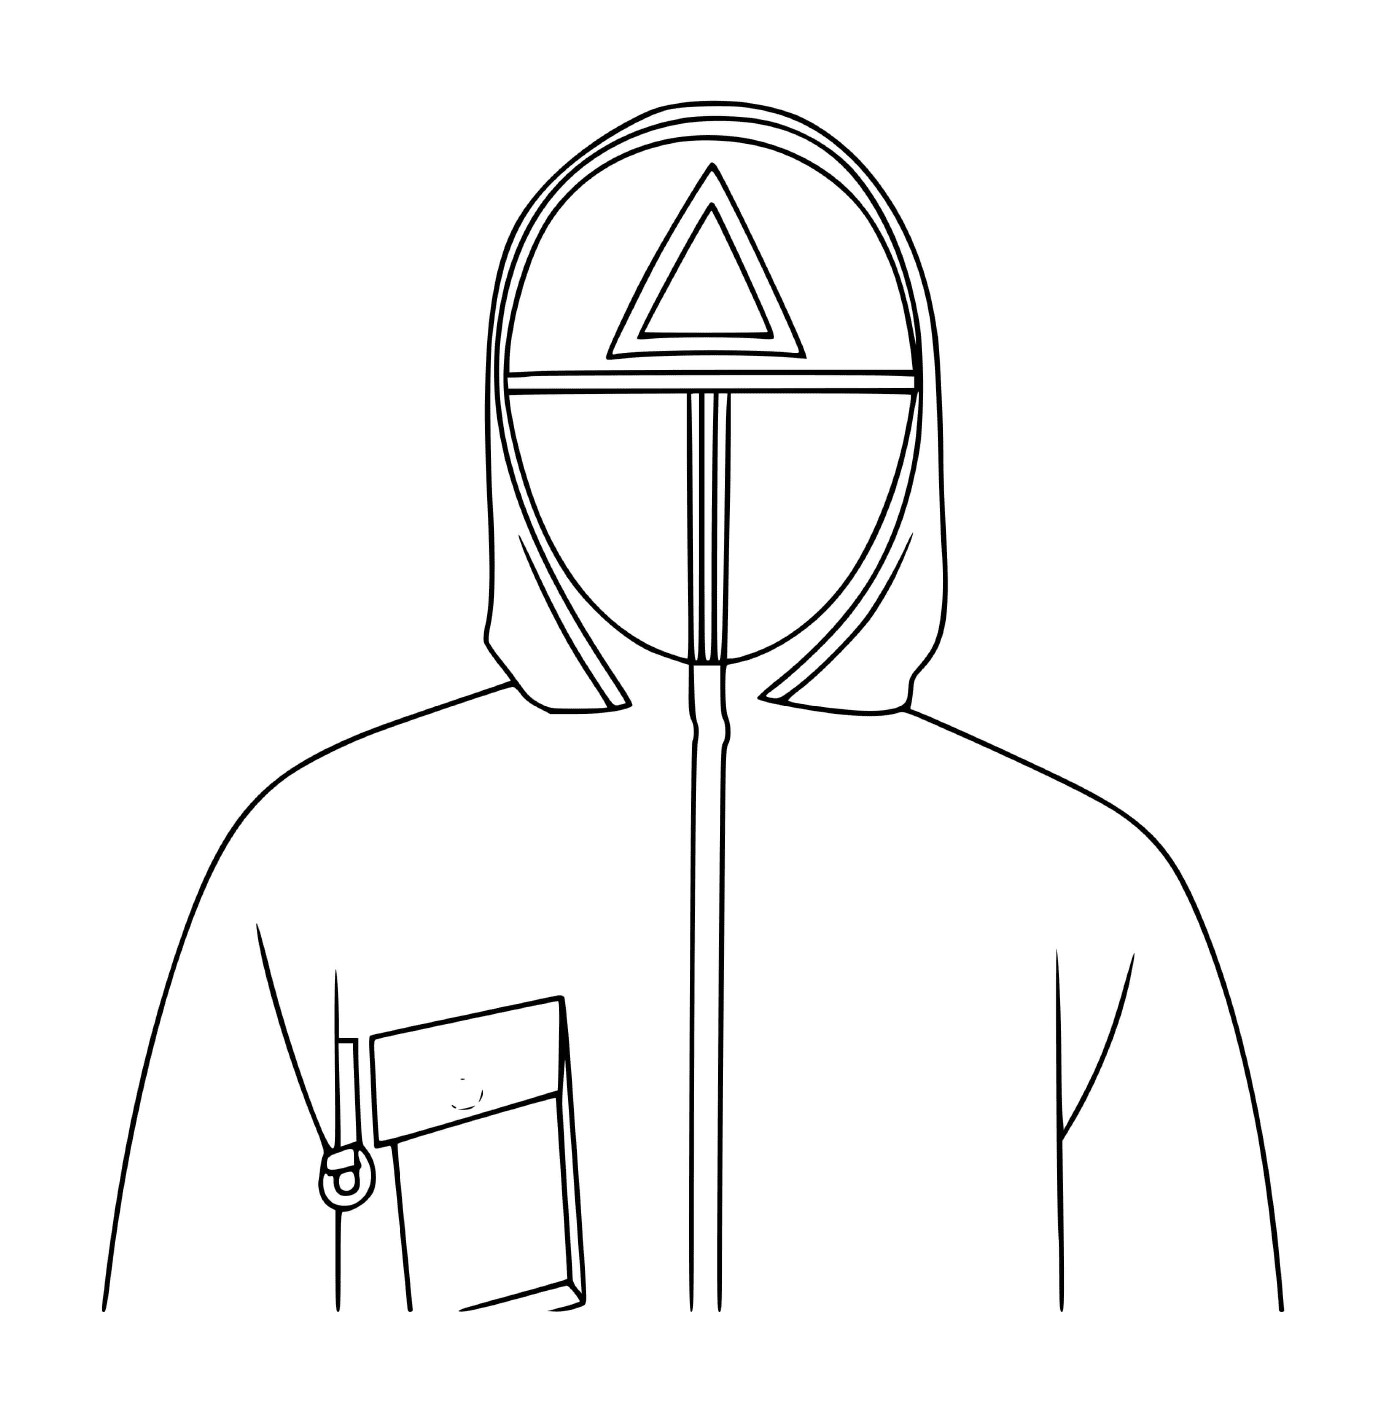  Soldier with triangle mask 